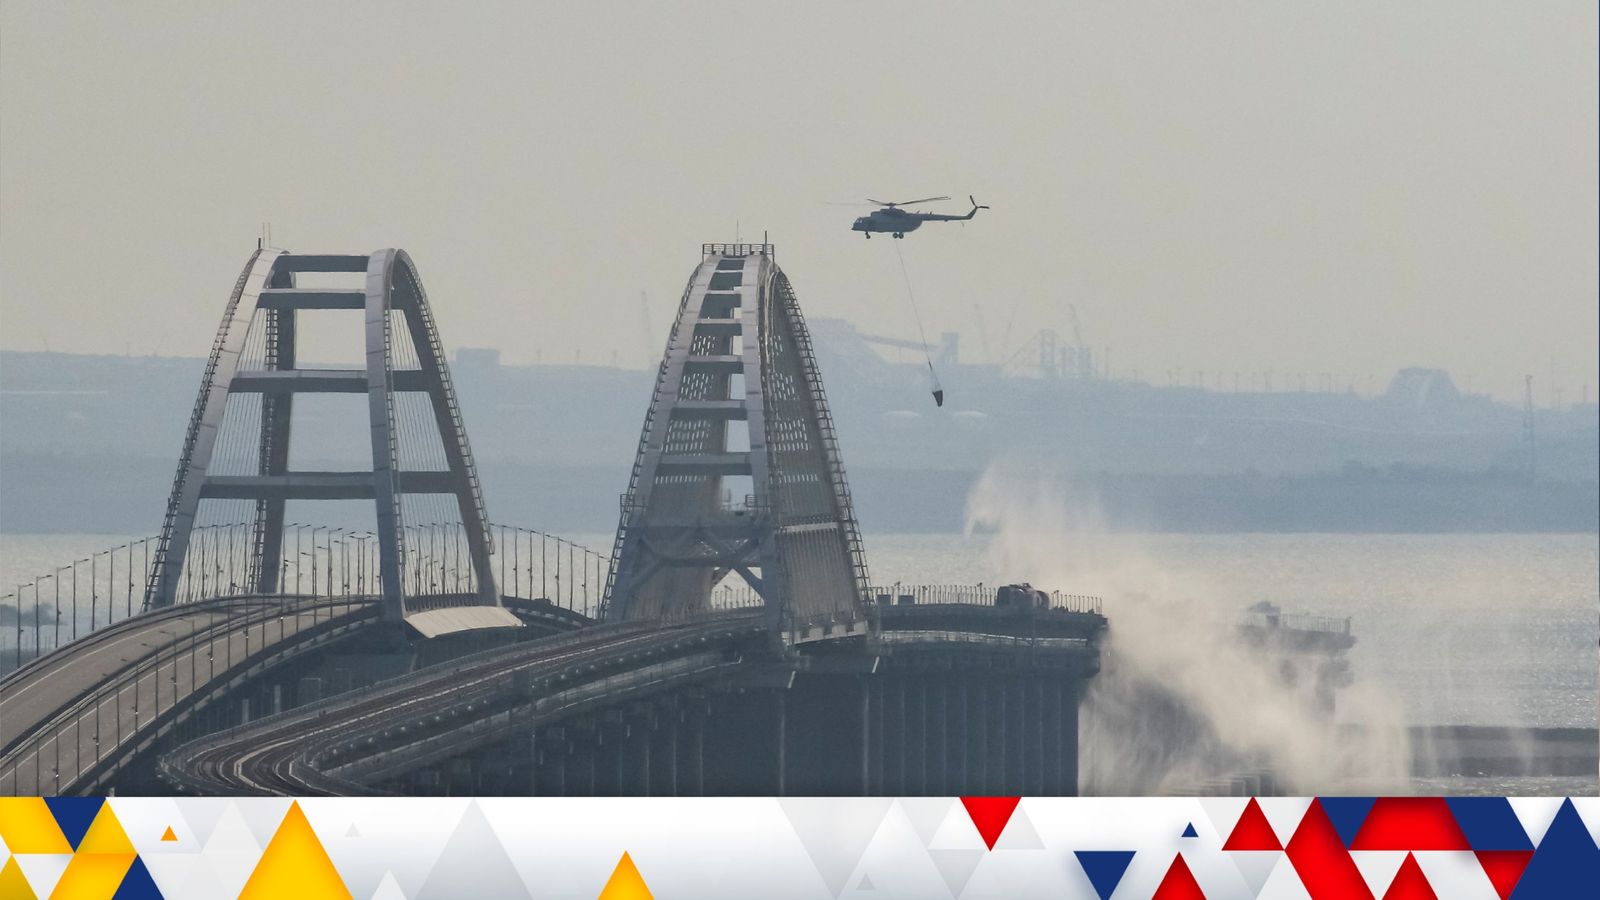 Crimea bridge explosion could be turning point for Russia - as Ukraine 'flicks two fingers' at Putin